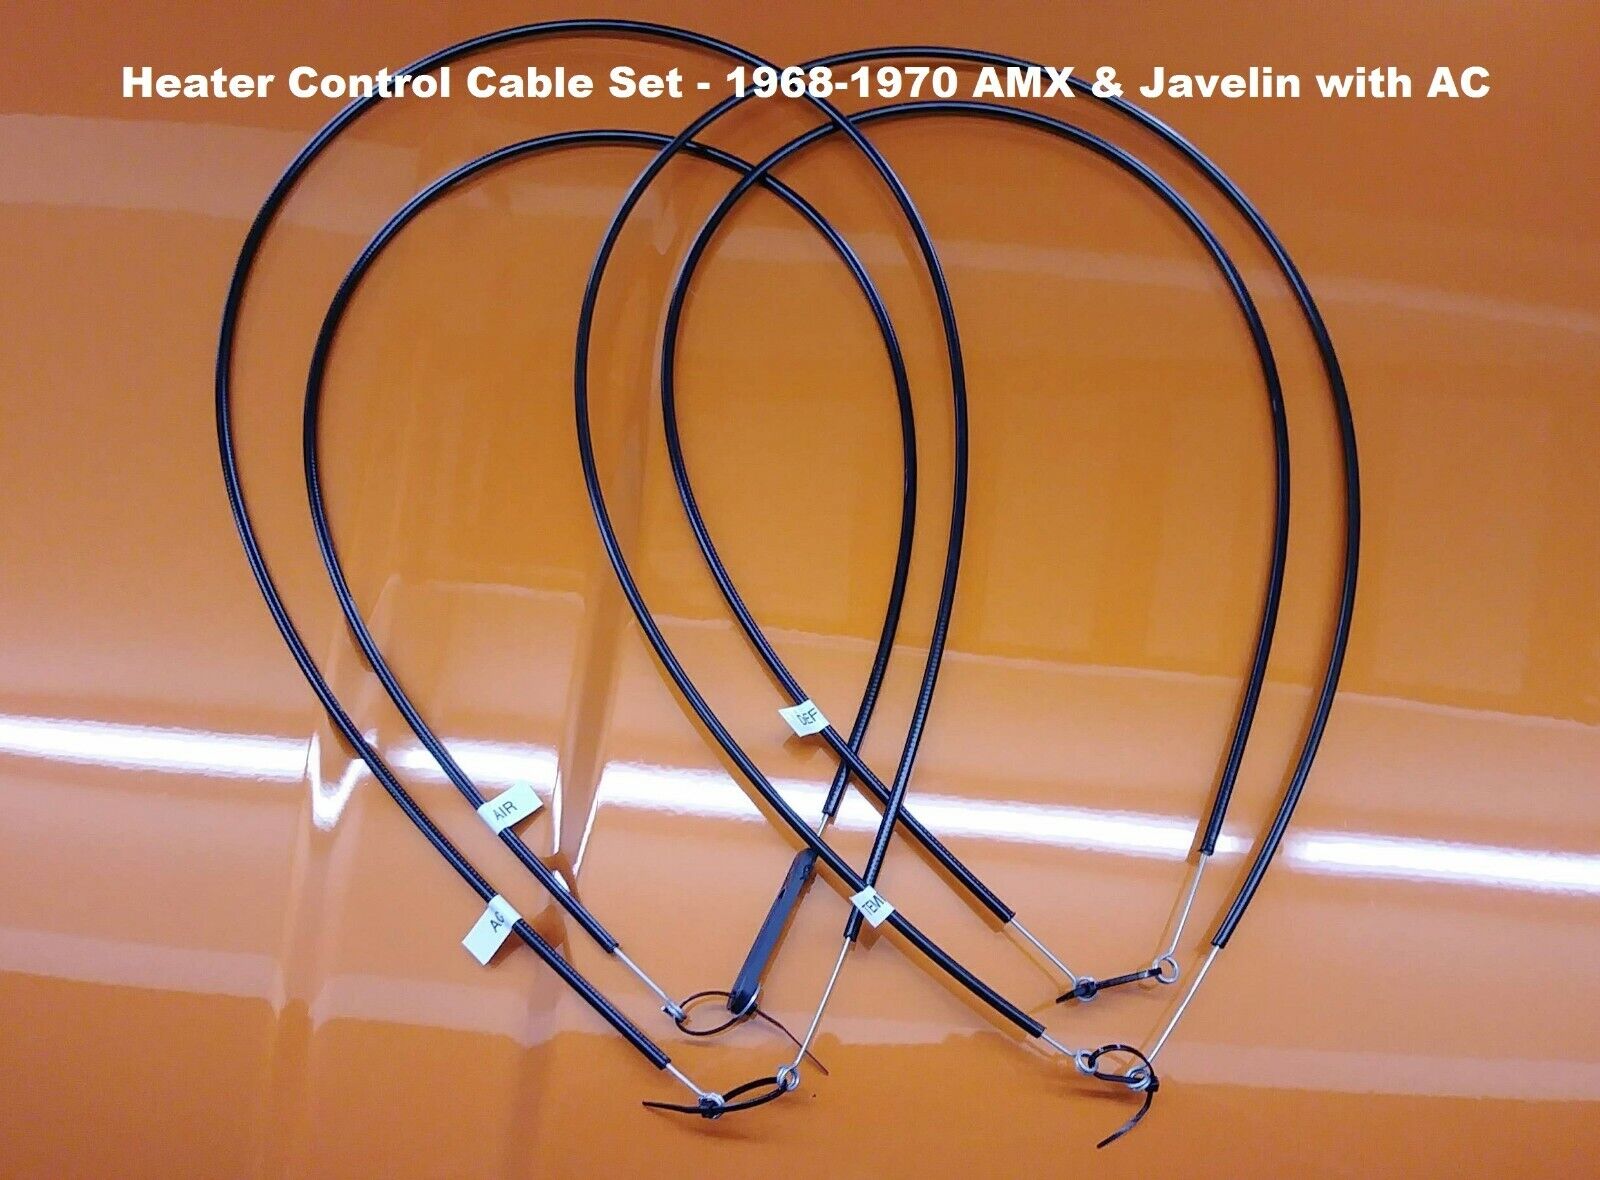 1968-70 AMC AMX & Javelin Heater Control Cable Set, for AC equipped cars